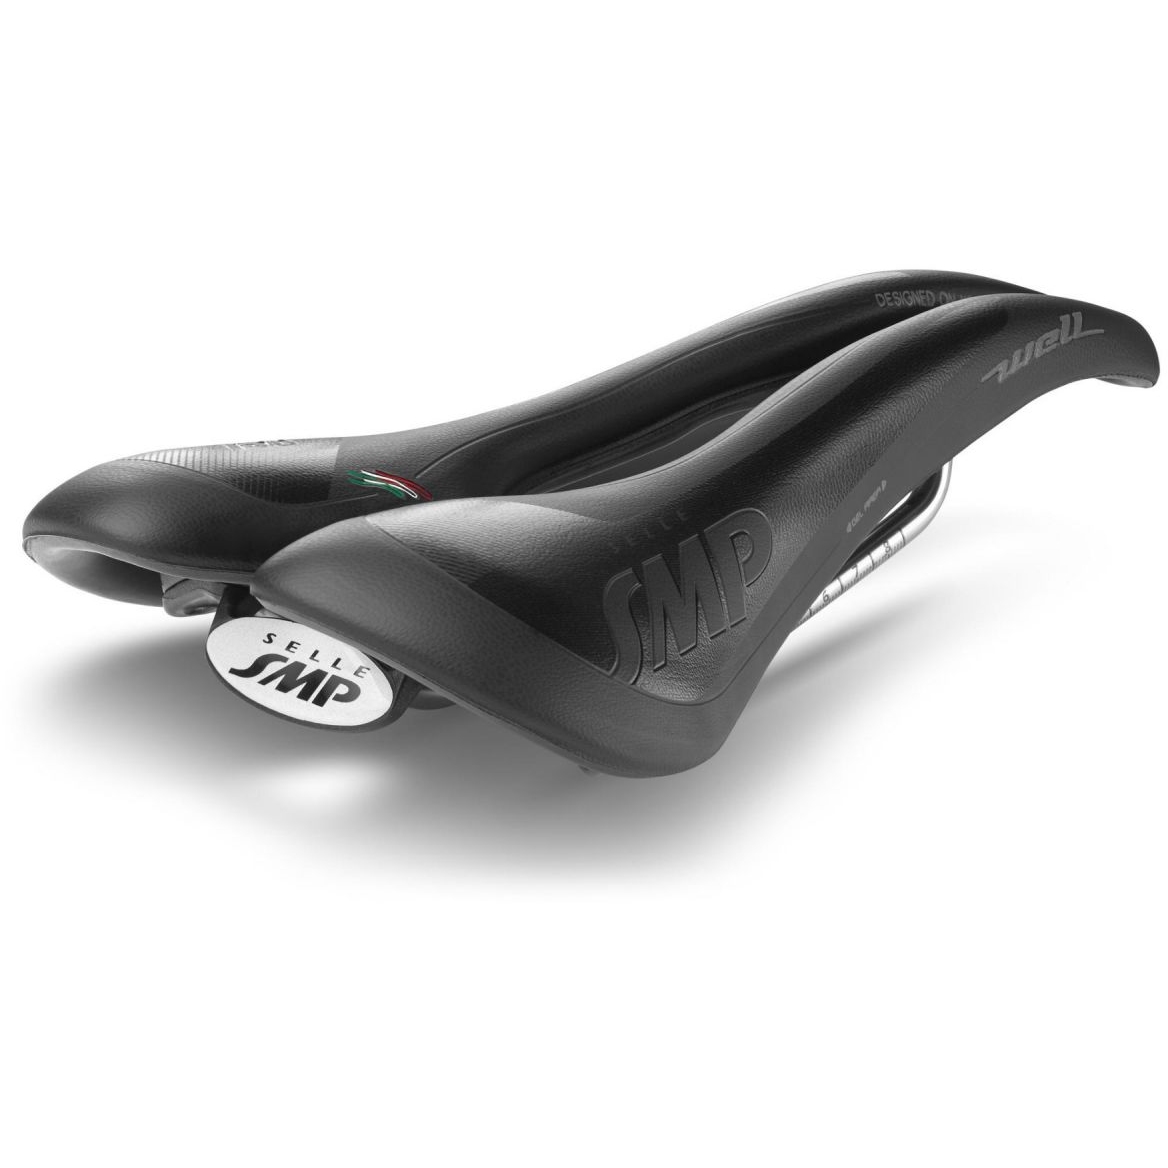 Selle SMP High quality bike saddles from Italy BIKE24